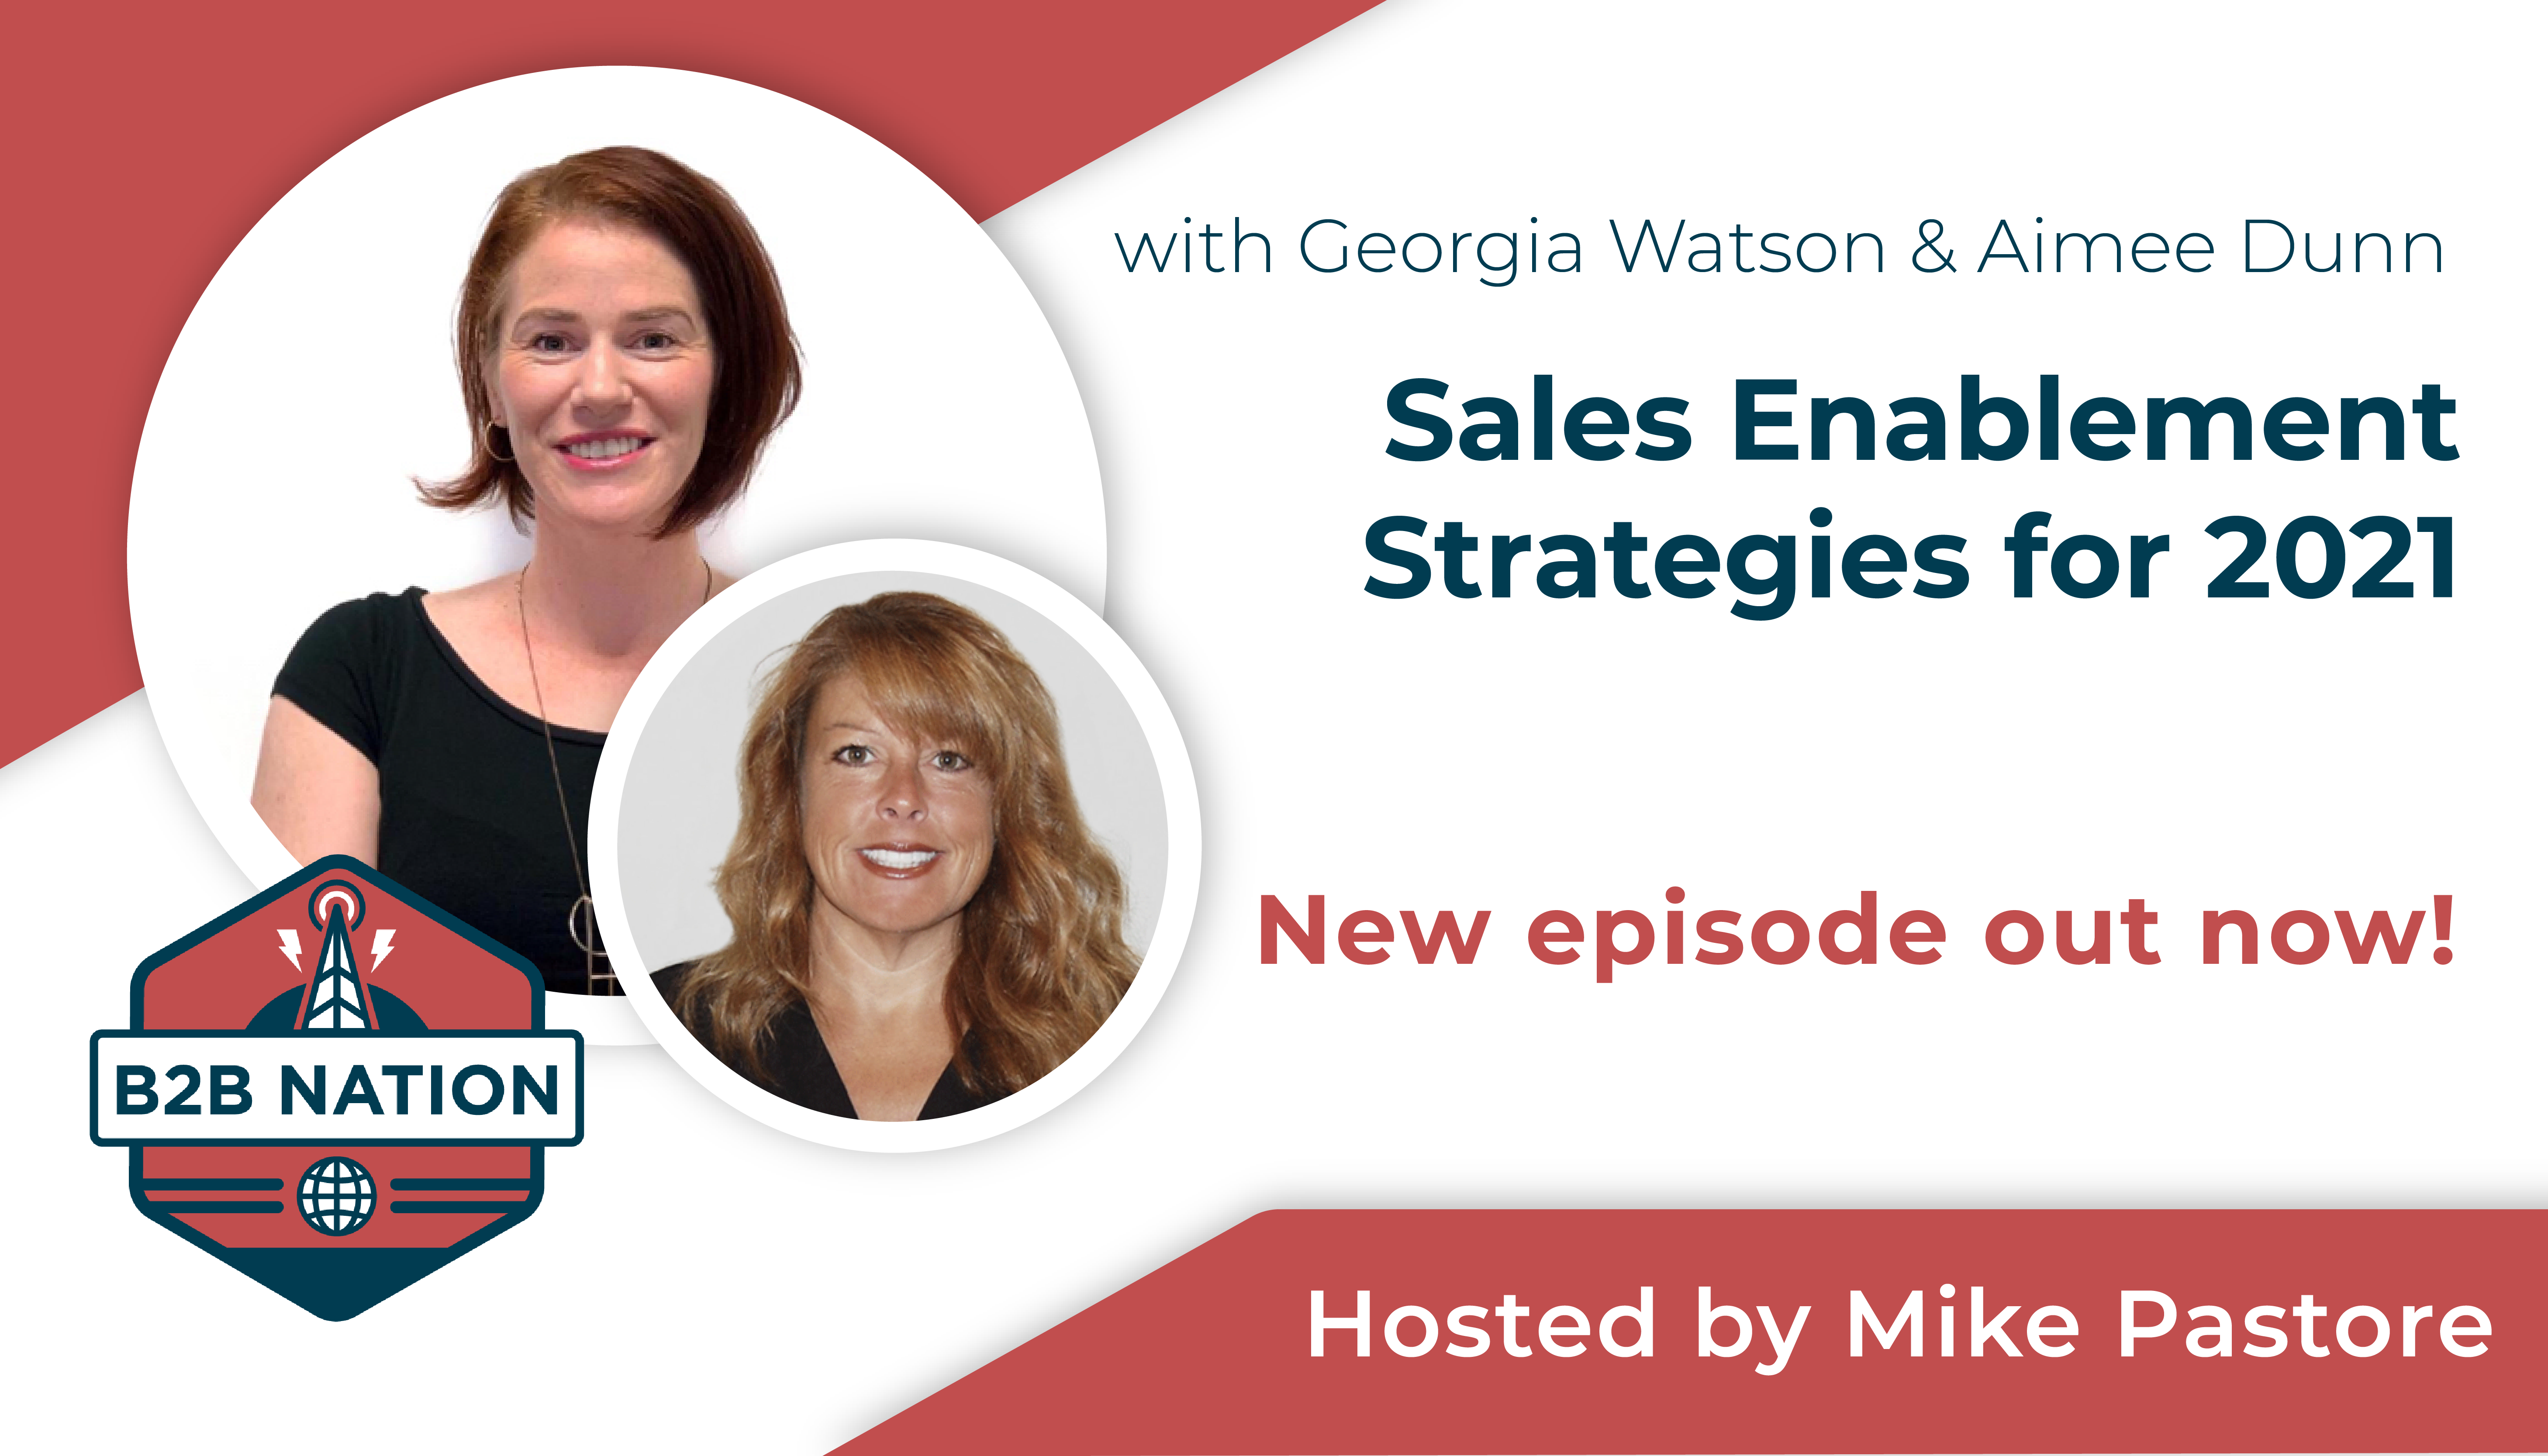 Sales enablement strategies for 2021.